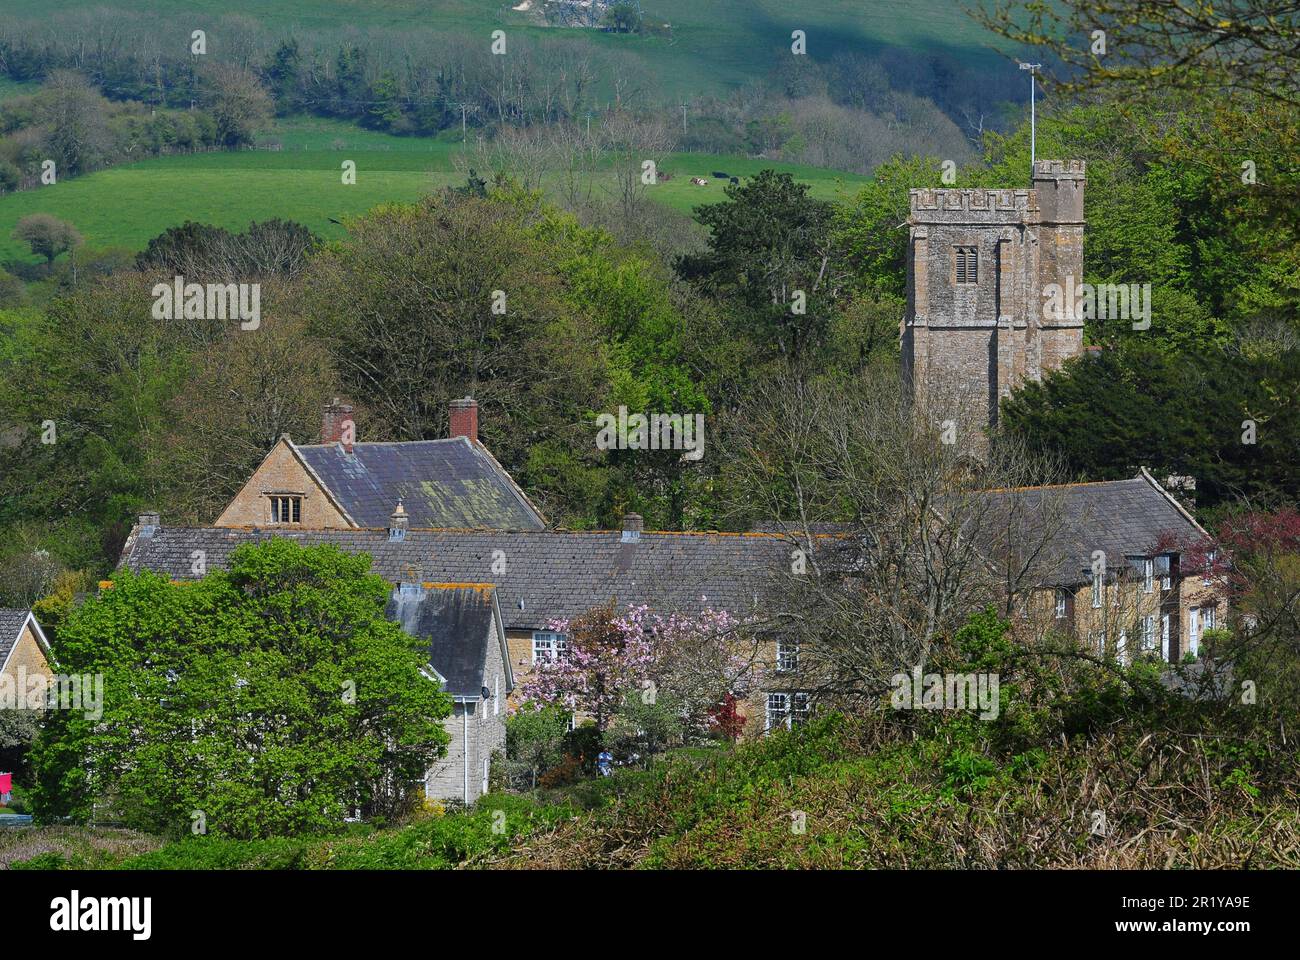 The village of Askerswell in West Dorset, UK Stock Photo